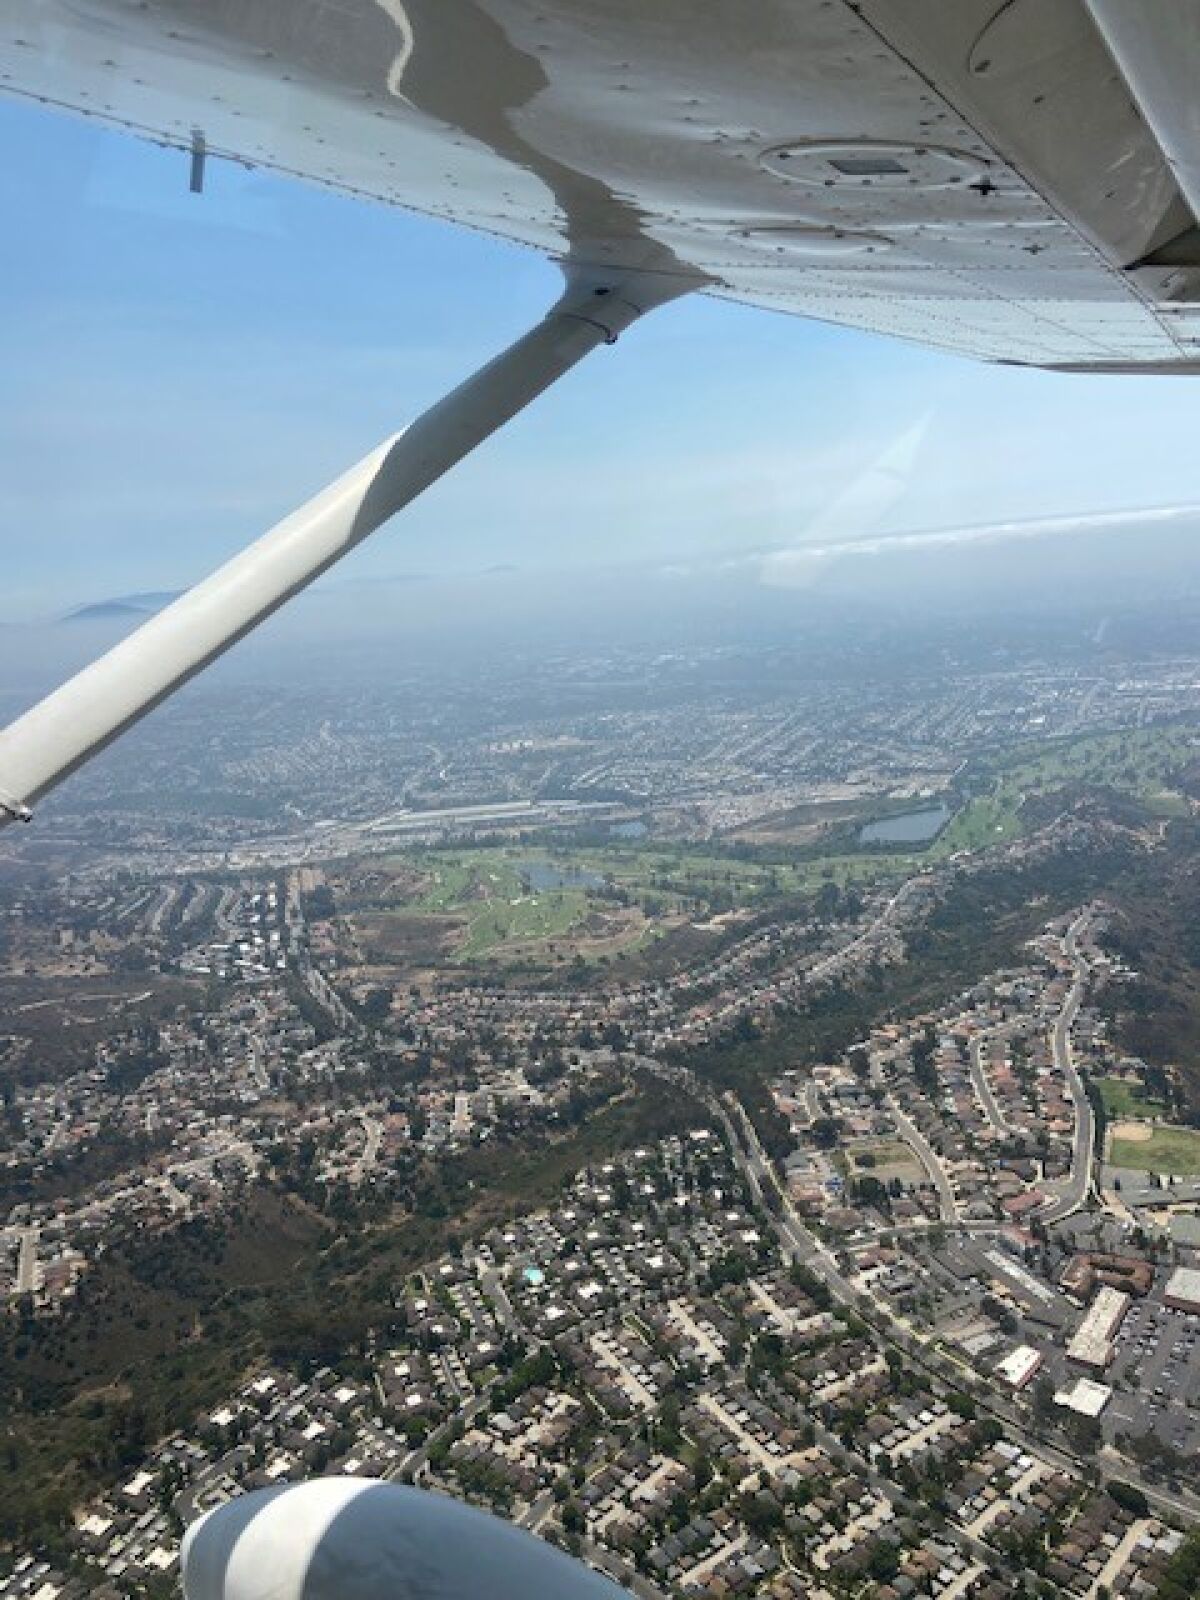 A view from Charlie Lansky's in-flight adventures.